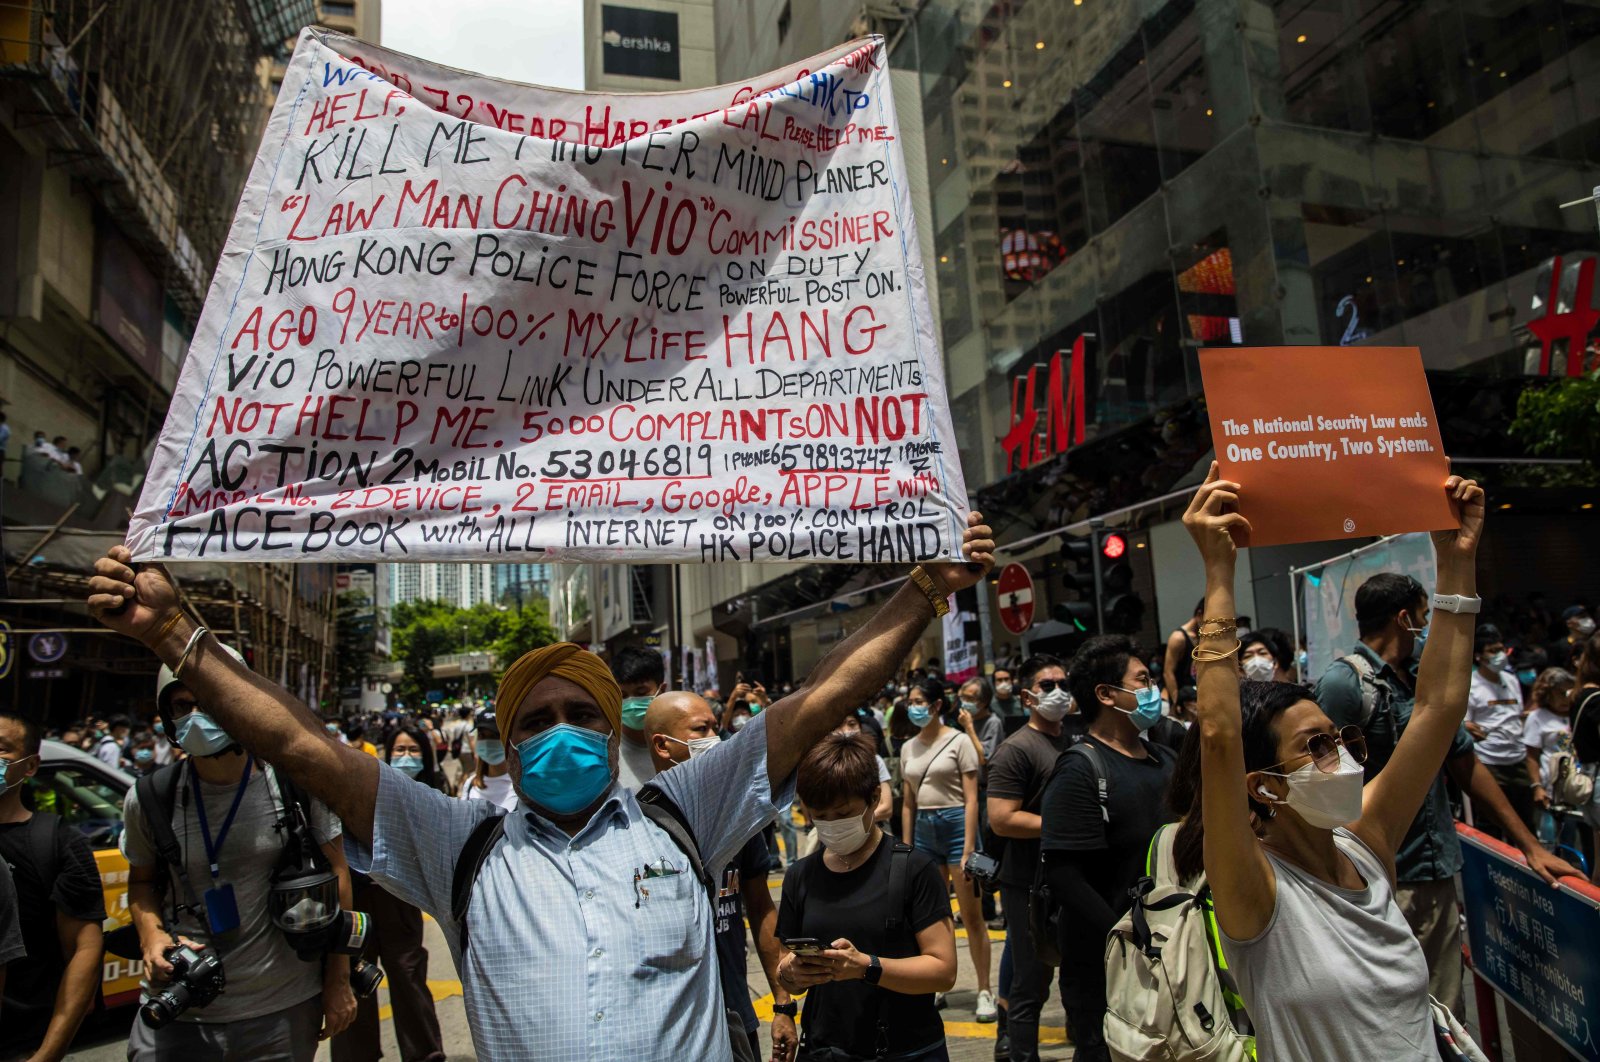 Protesters display banners during a rally against a new national security law in Hong Kong on July 1, 2020, on the 23rd anniversary of the city's handover from Britain to China. (AFP Photo)